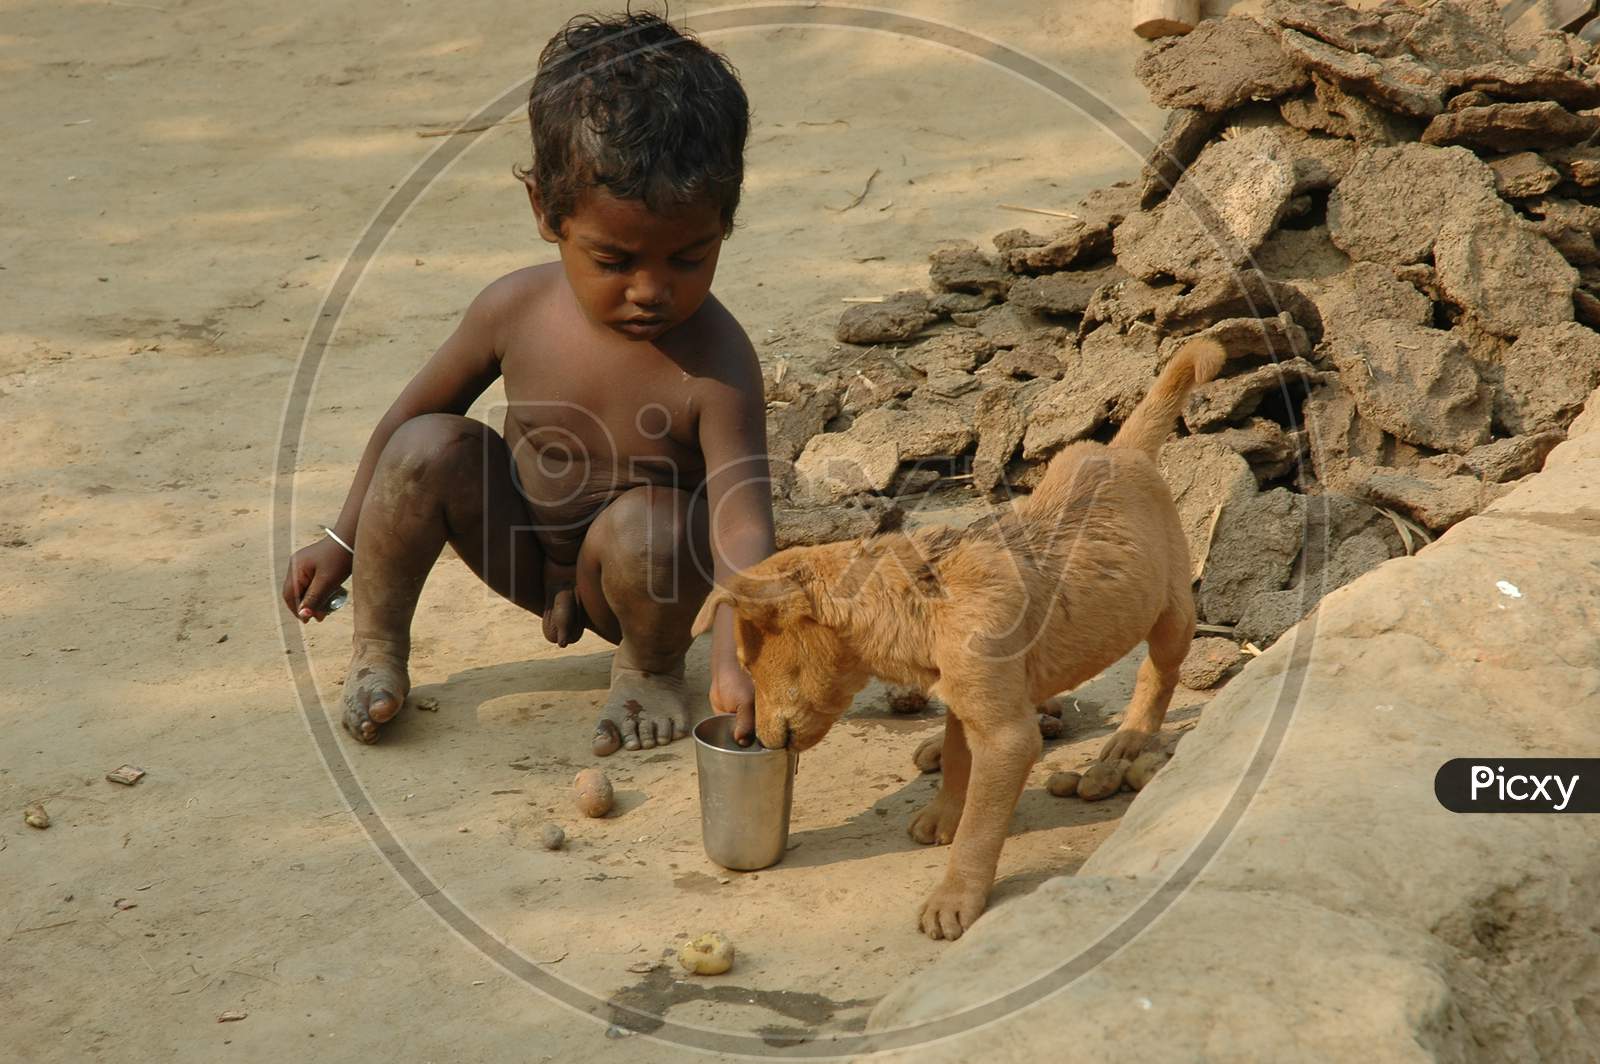 A Tribal Village Boy Playing With a Dog In An Tribal  Village Near Murshidabad , West Bengal